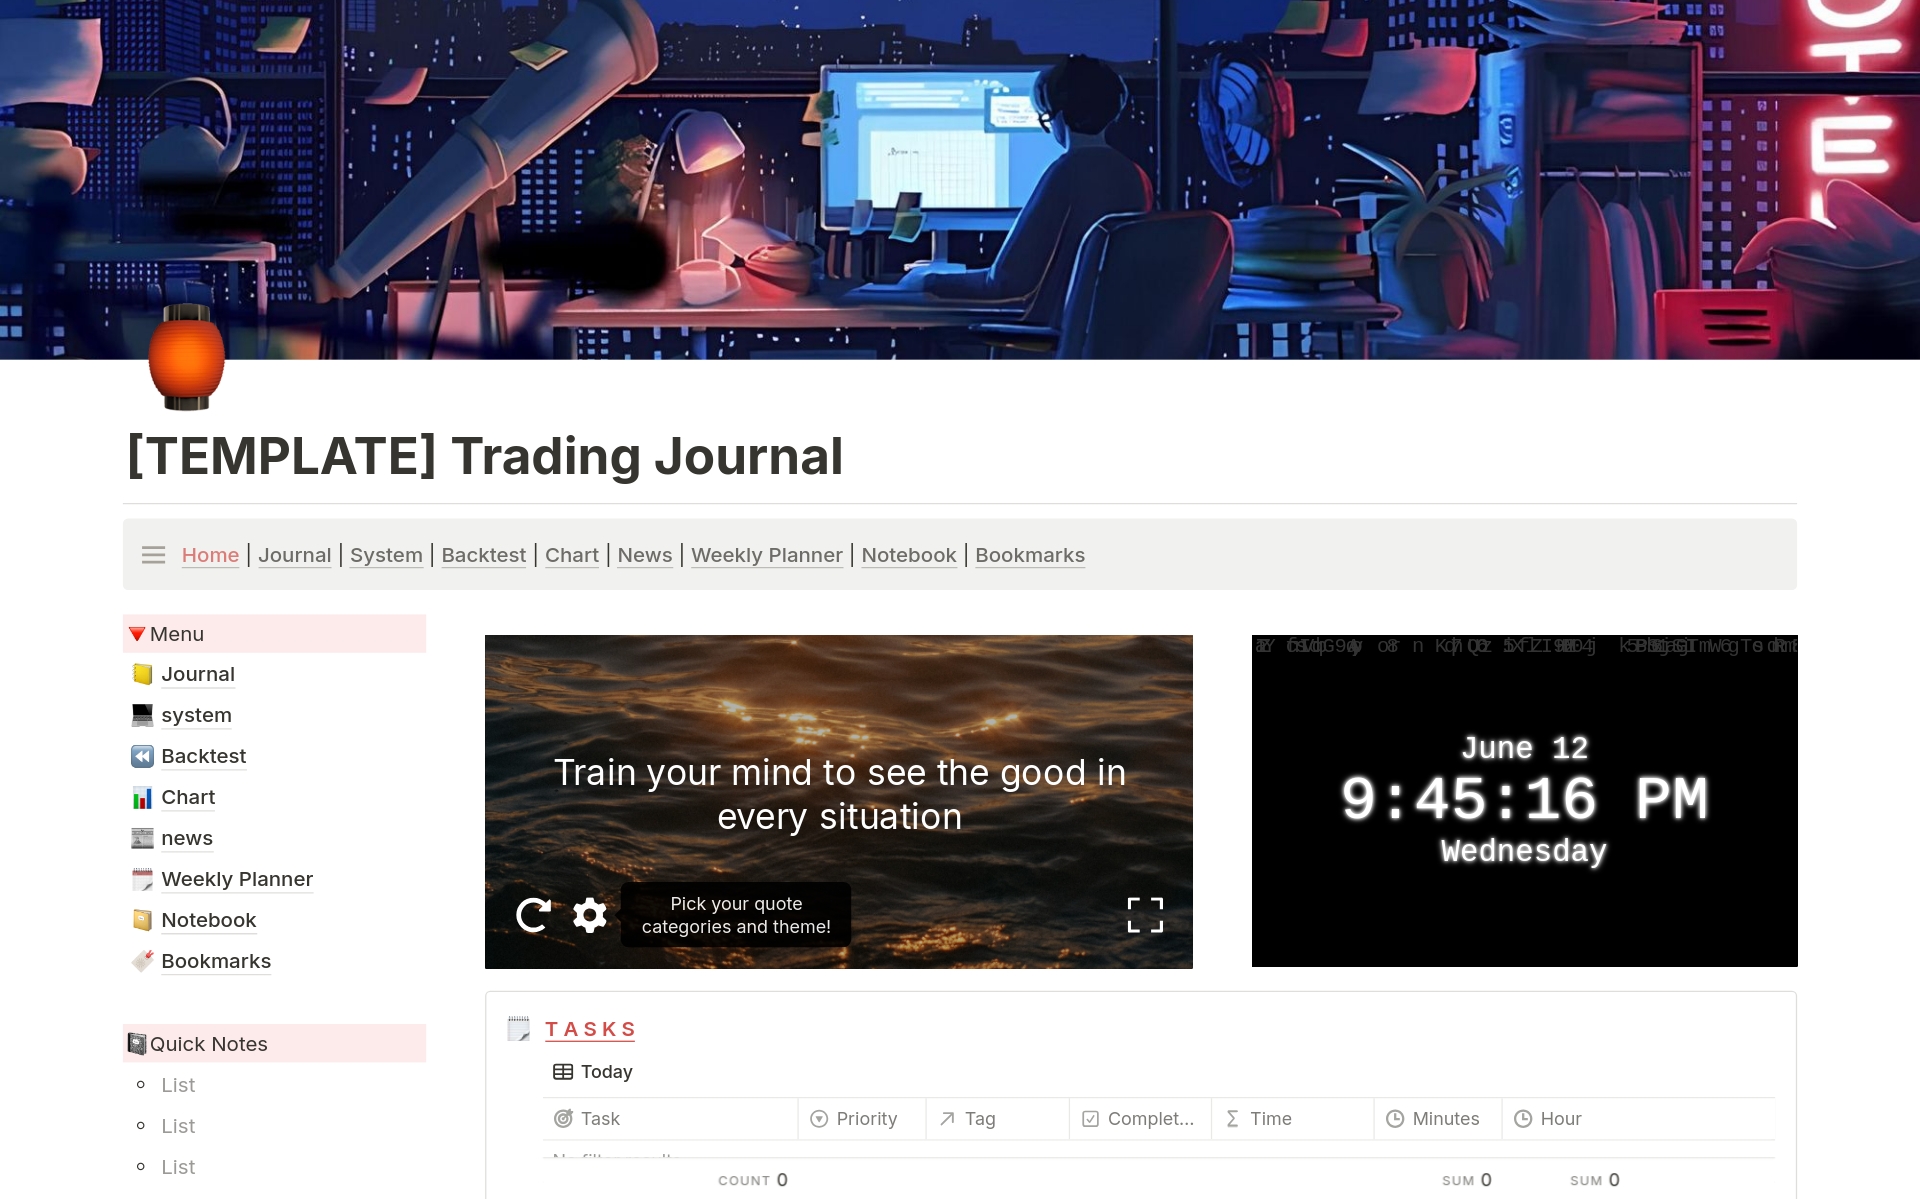 Ultimate Trading Journal Template
Streamline your trading with our all-in-one Trading Journal Template! Track and analyze your trades, manage your trading systems, and stay updated with market news. Features include advanced account reports, backtesting, chart analysis, weekly pl